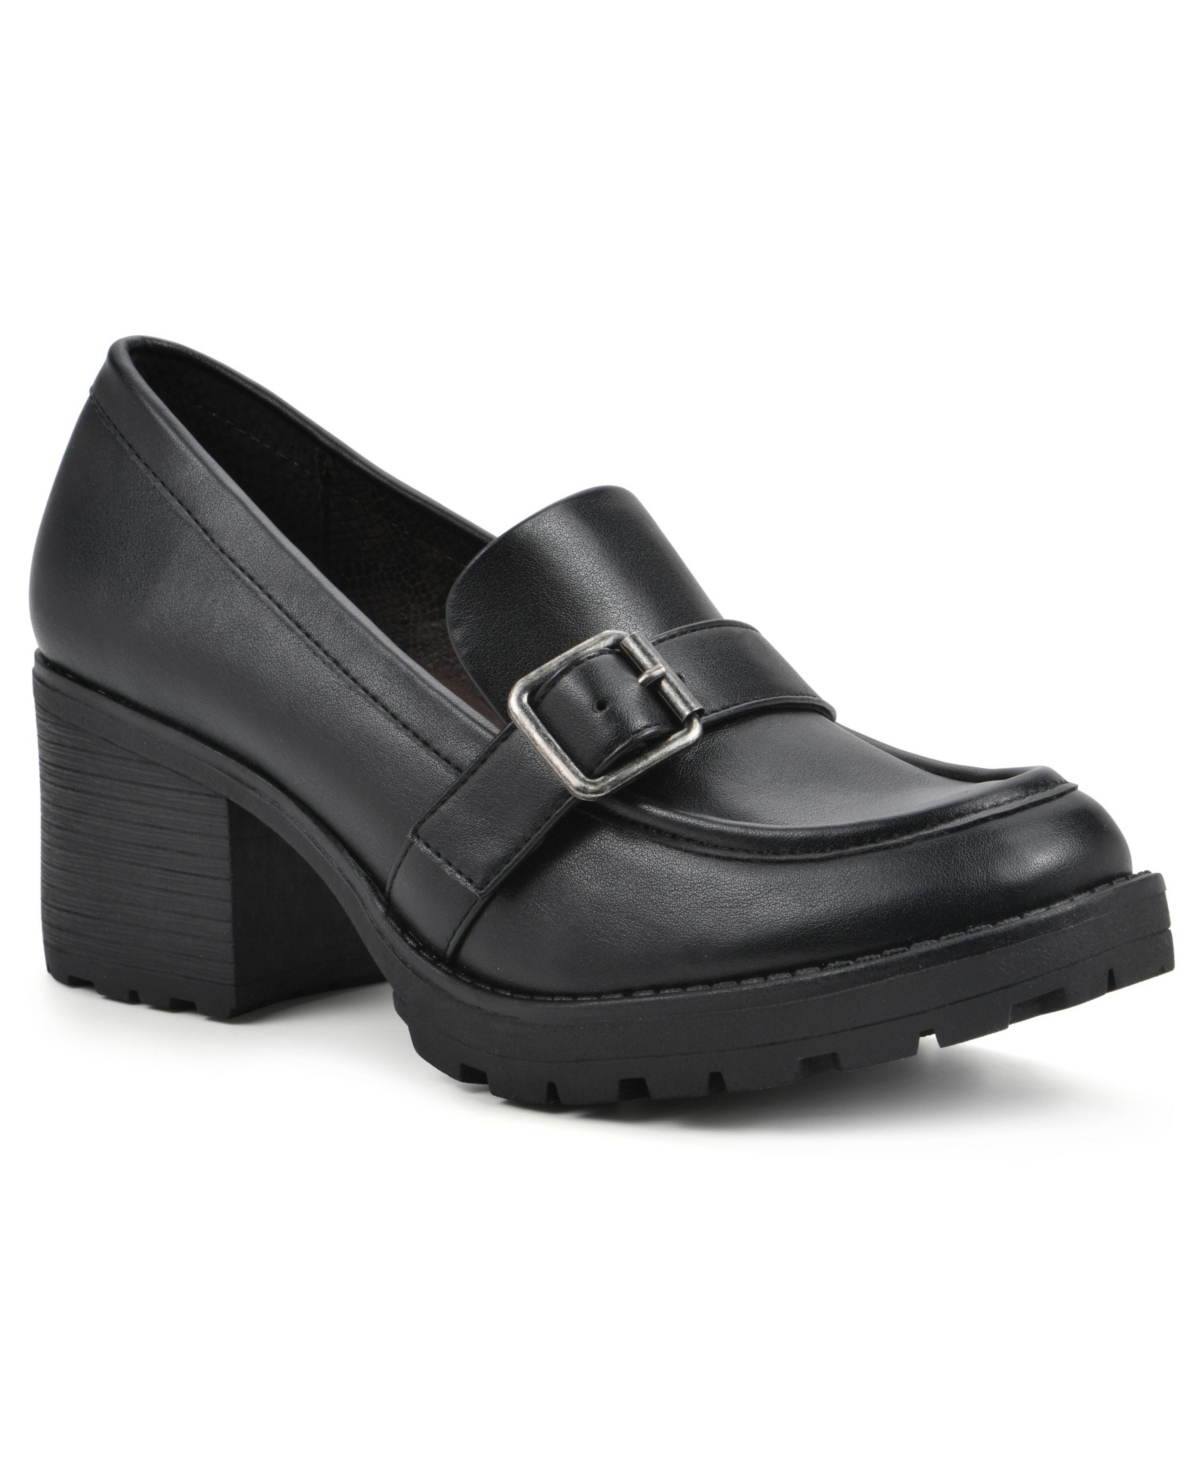 Women's Bougie Heeled Loafers - Black Smooth